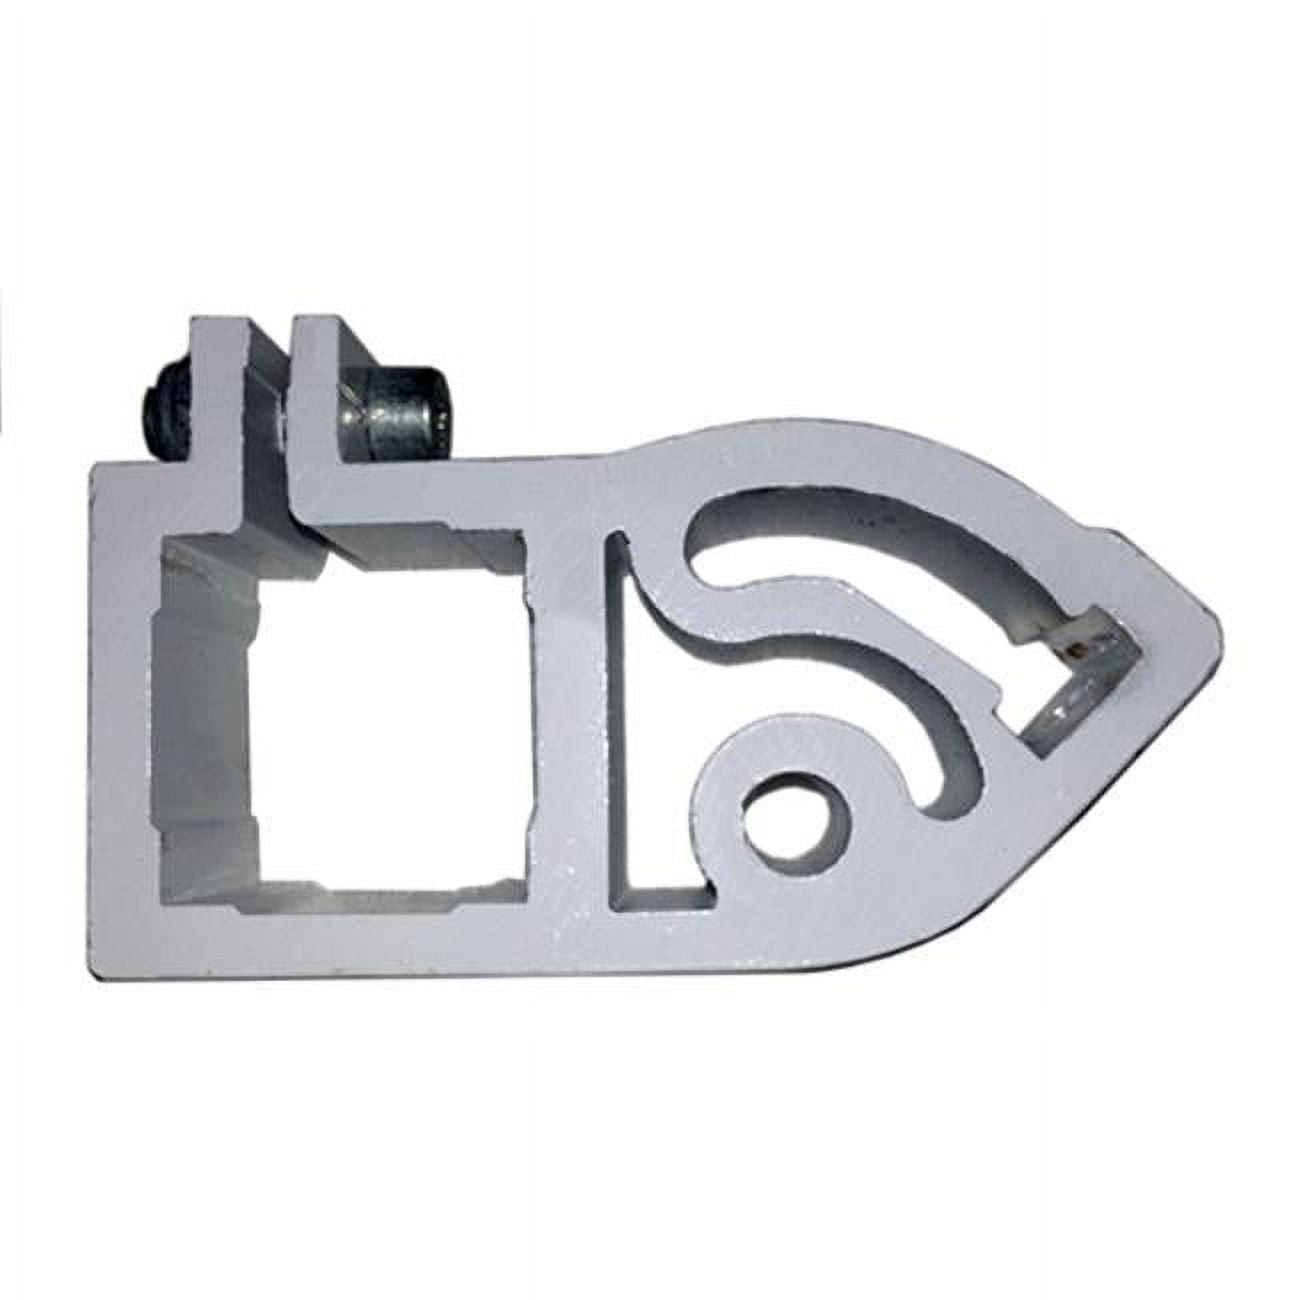 Awsupparmbracket-unb Support Arm Bracket For Retractable Awning, White